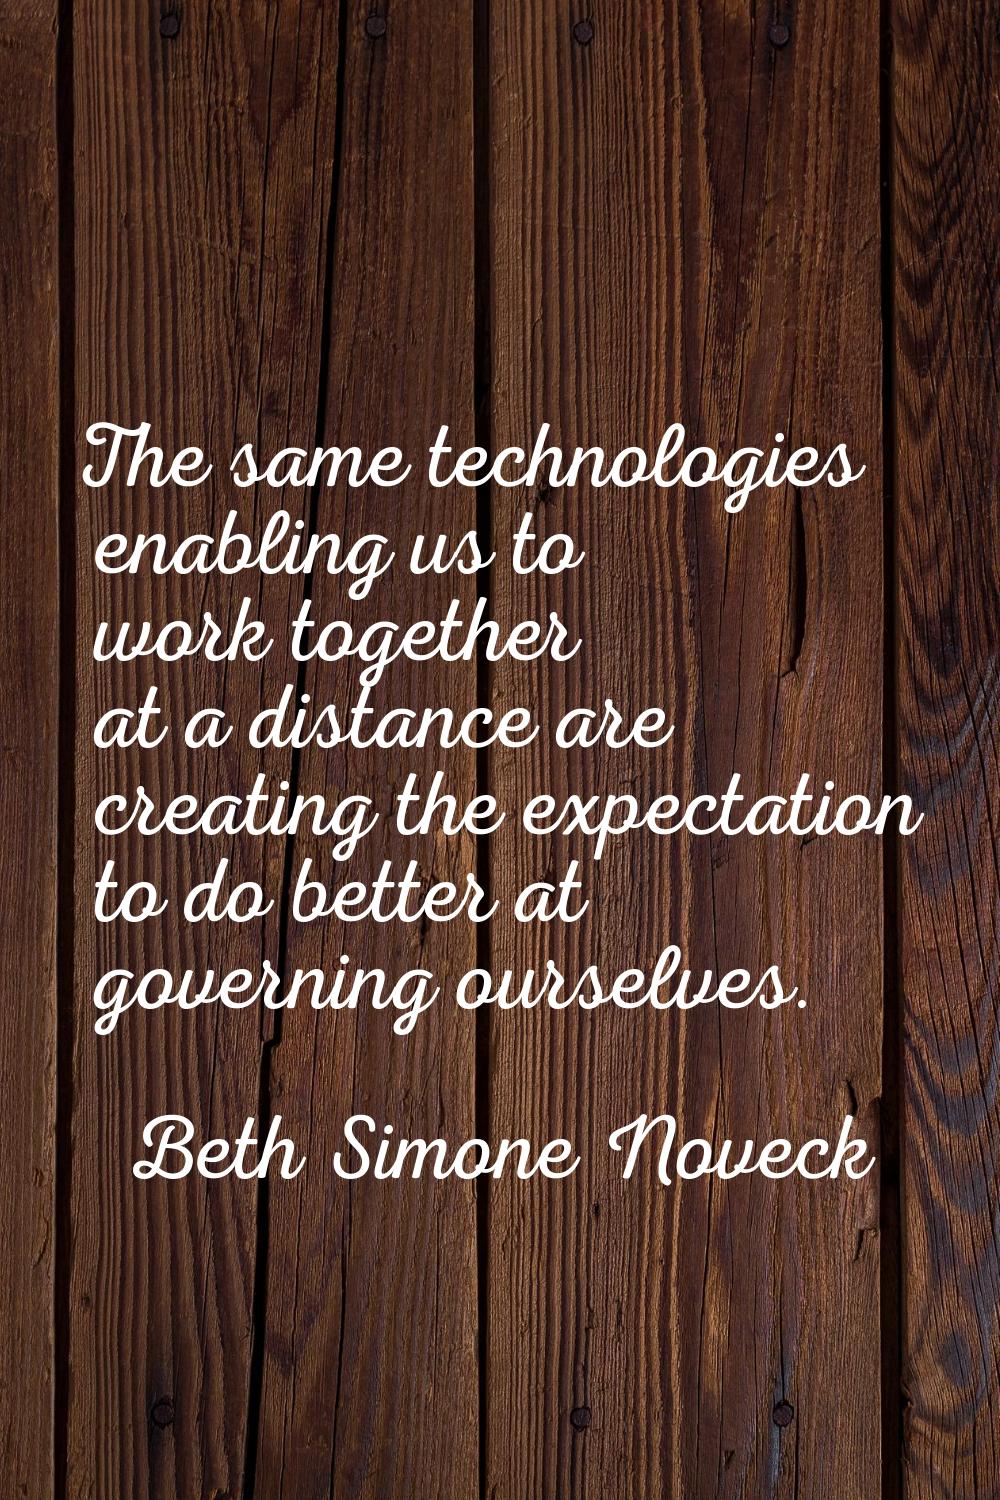 The same technologies enabling us to work together at a distance are creating the expectation to do